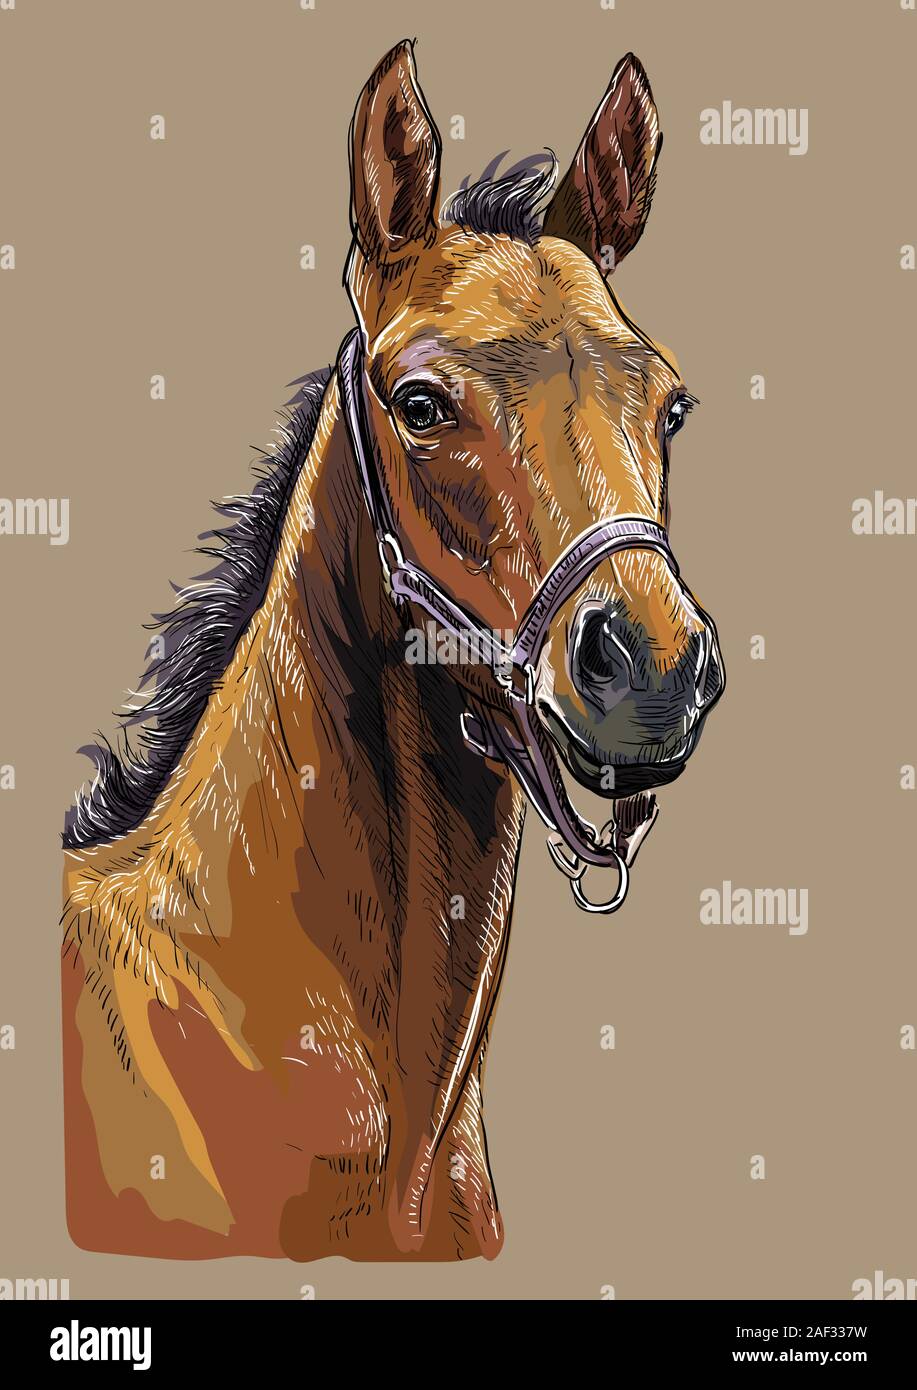 Colorful bay foal portrait with halter. Horse head isolated on beige background. Vector hand drawing illustration. Retro style portrait of horse. Stock Vector